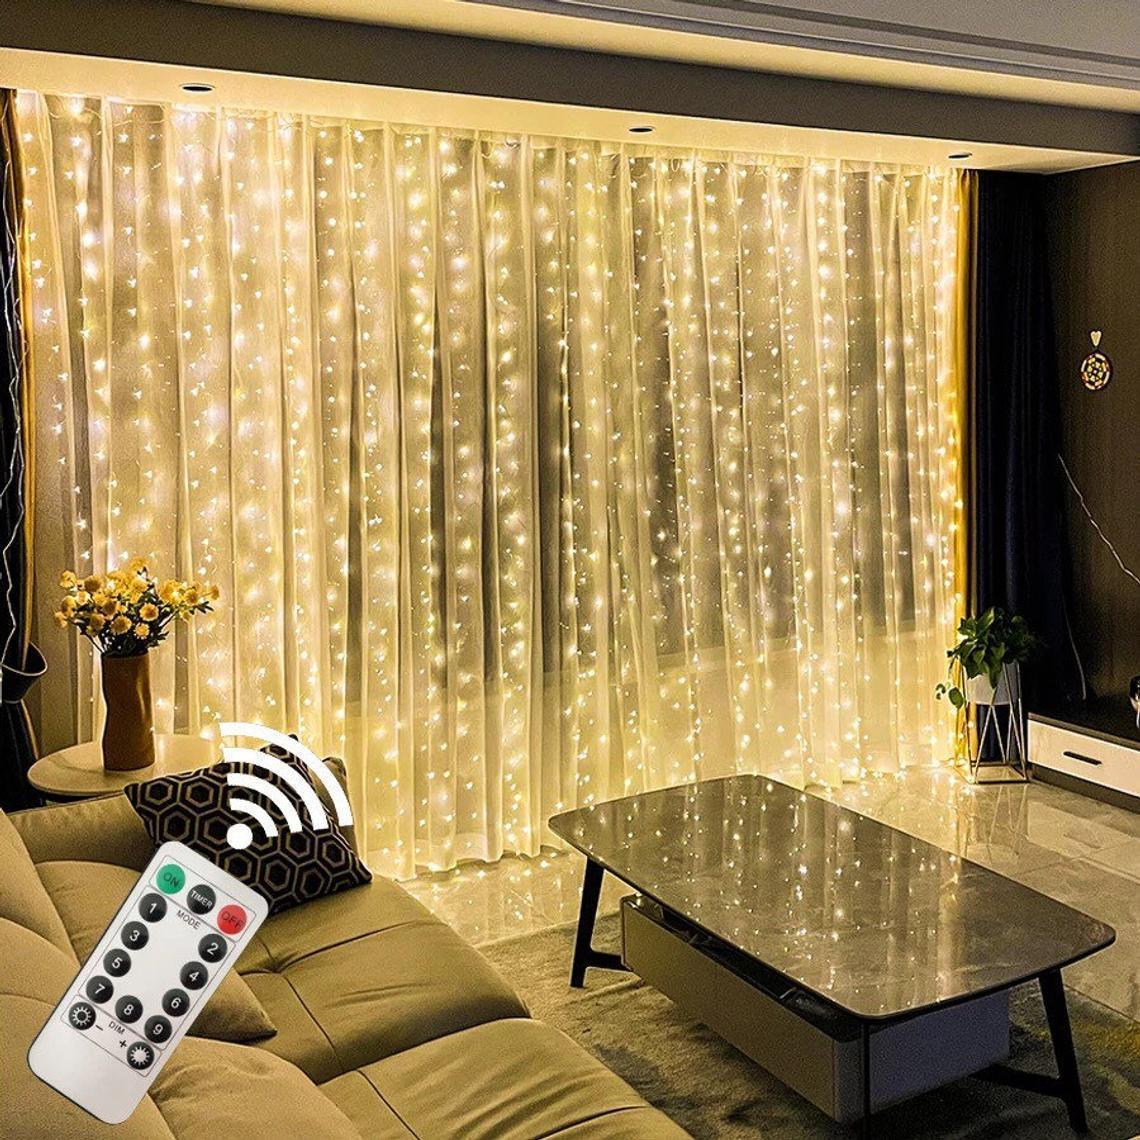 LIGHTING Window Curtain String Lights for Bedroom Decorations - If you say i do